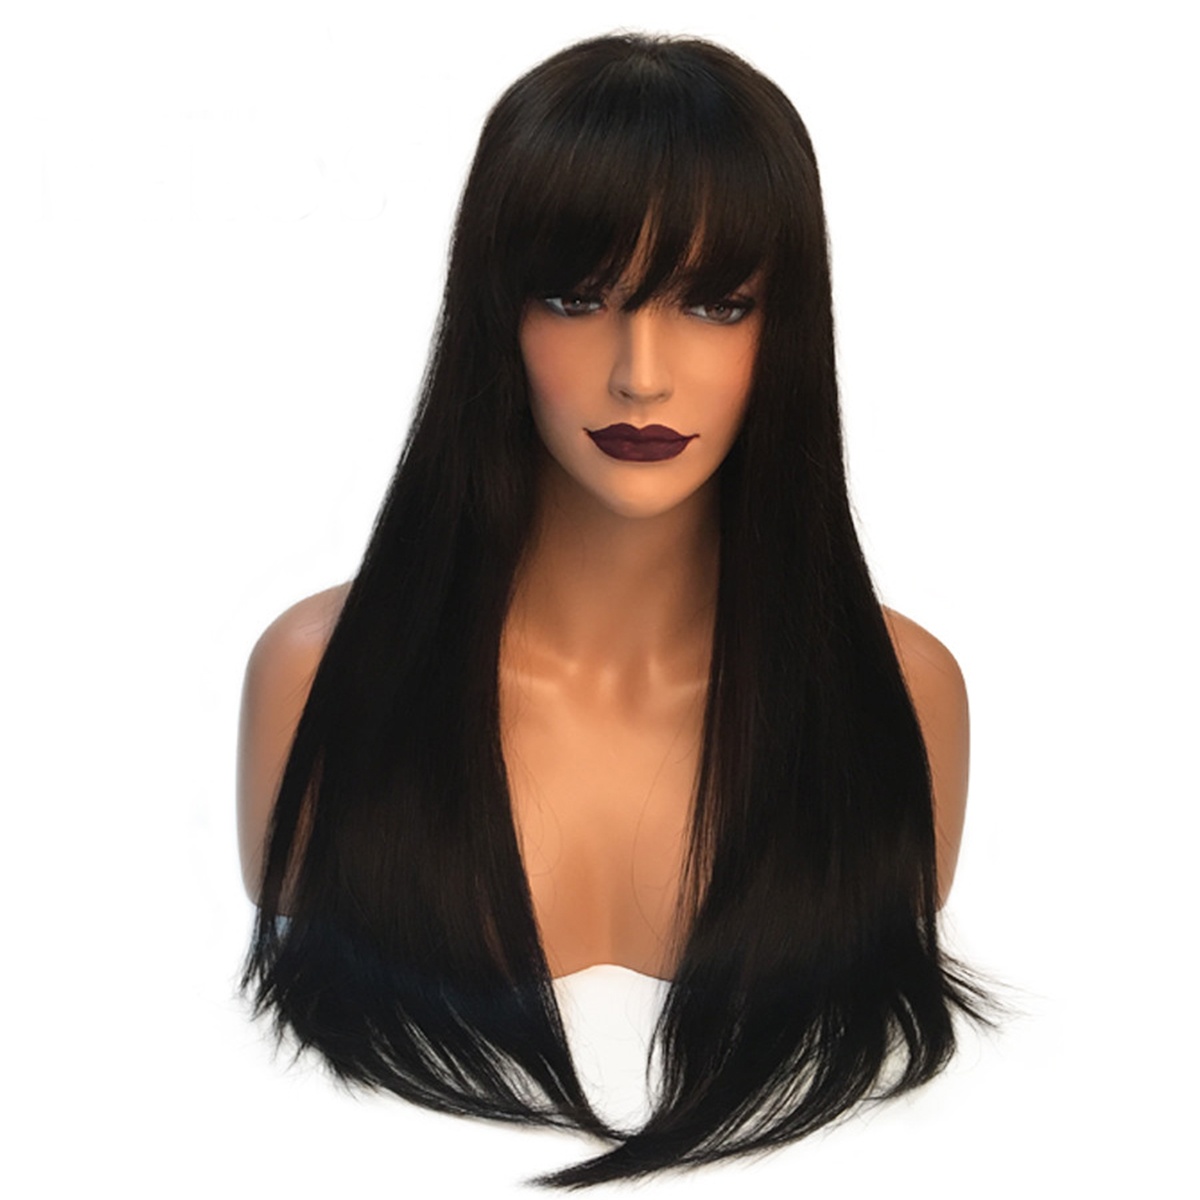 130% Density Straight Lace Front Human Hair Wigs For Black Women Glueless Human Hair Wigs With Bangs